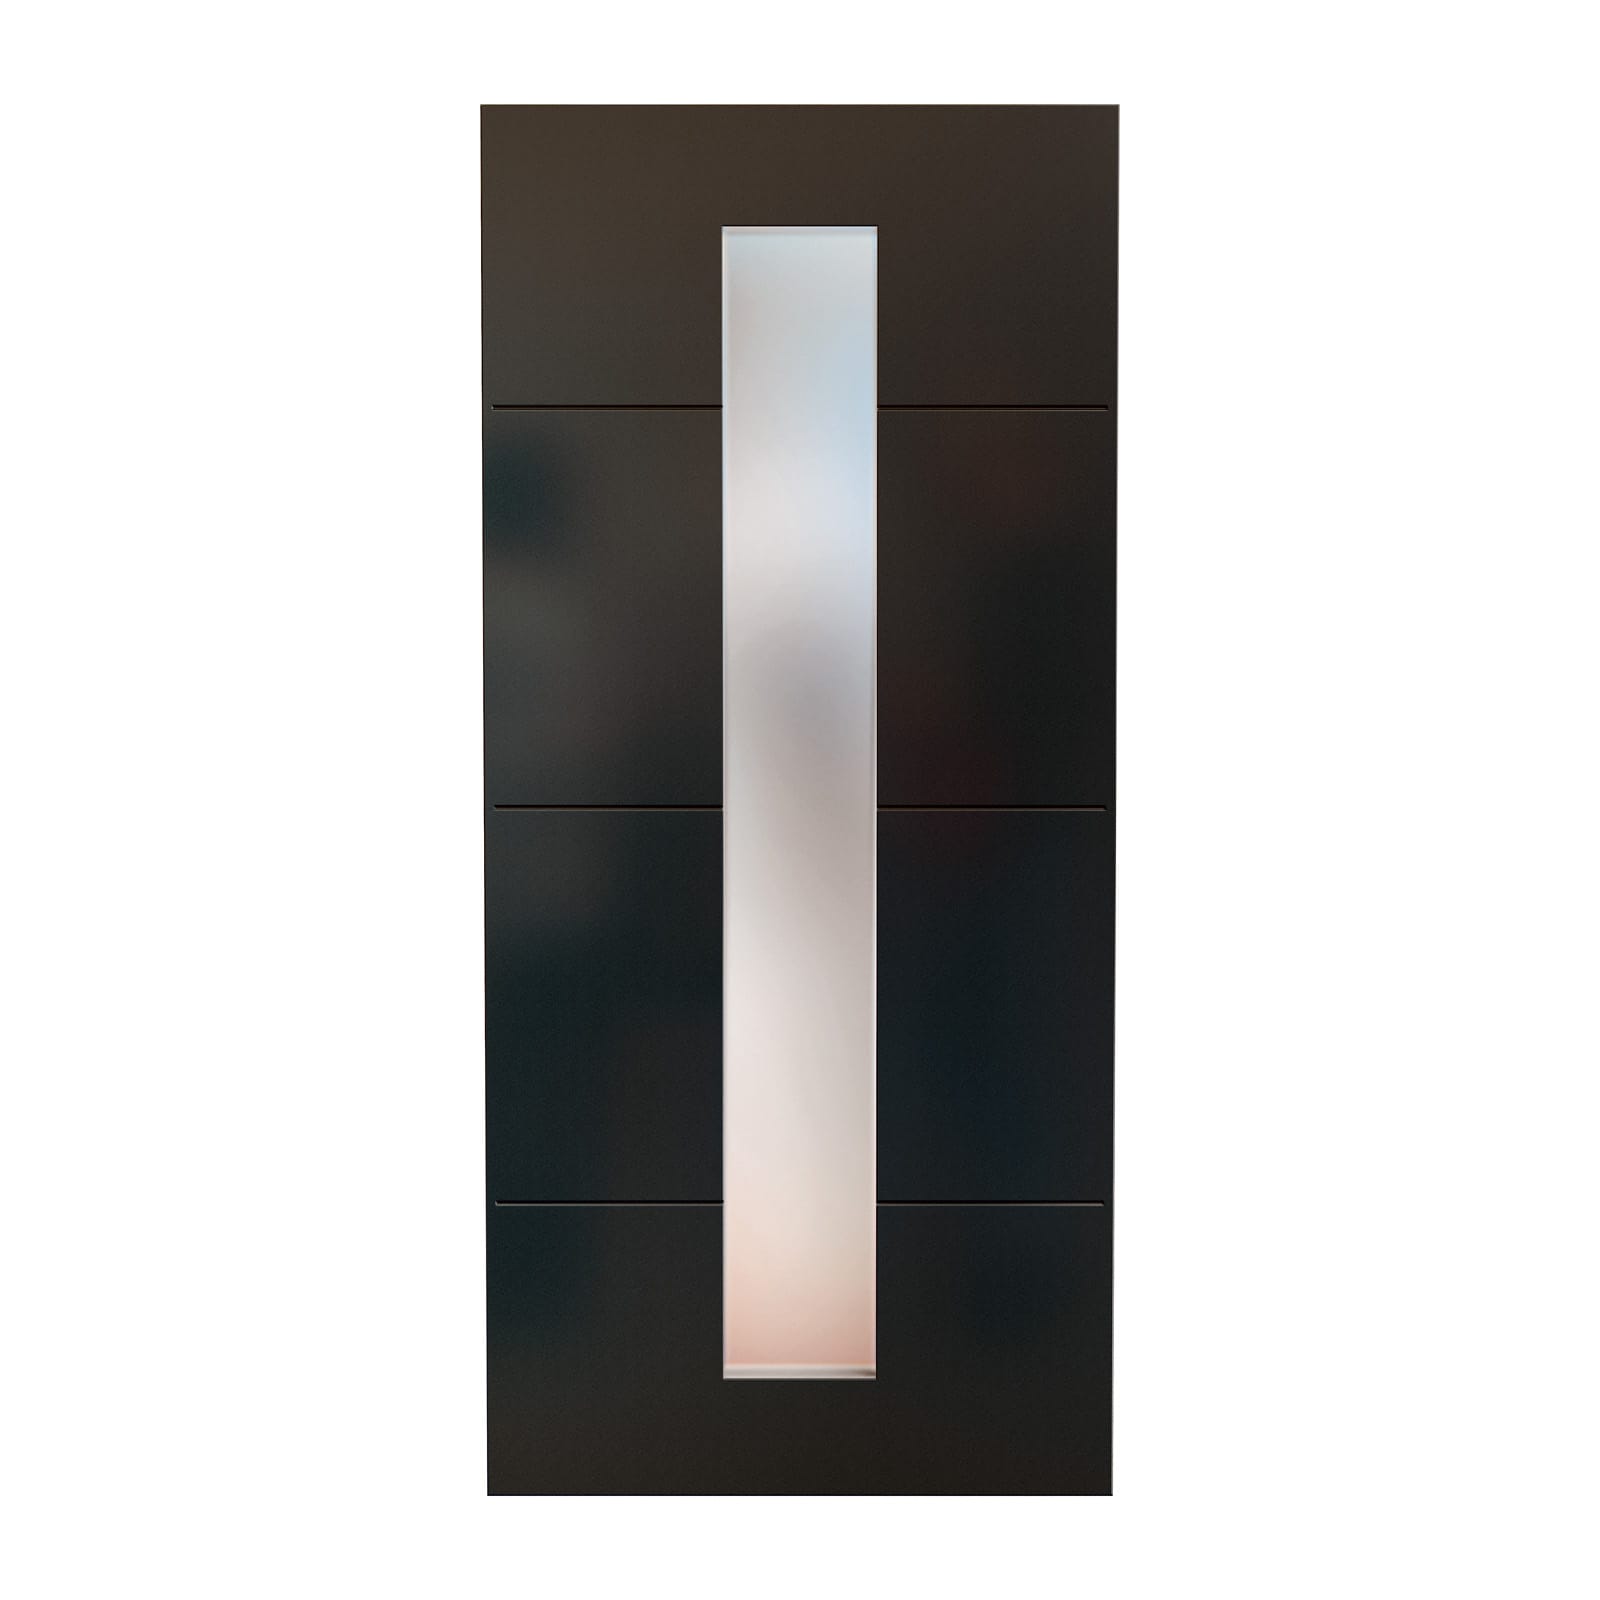 Alitherm 400 Door with PM0000P panel